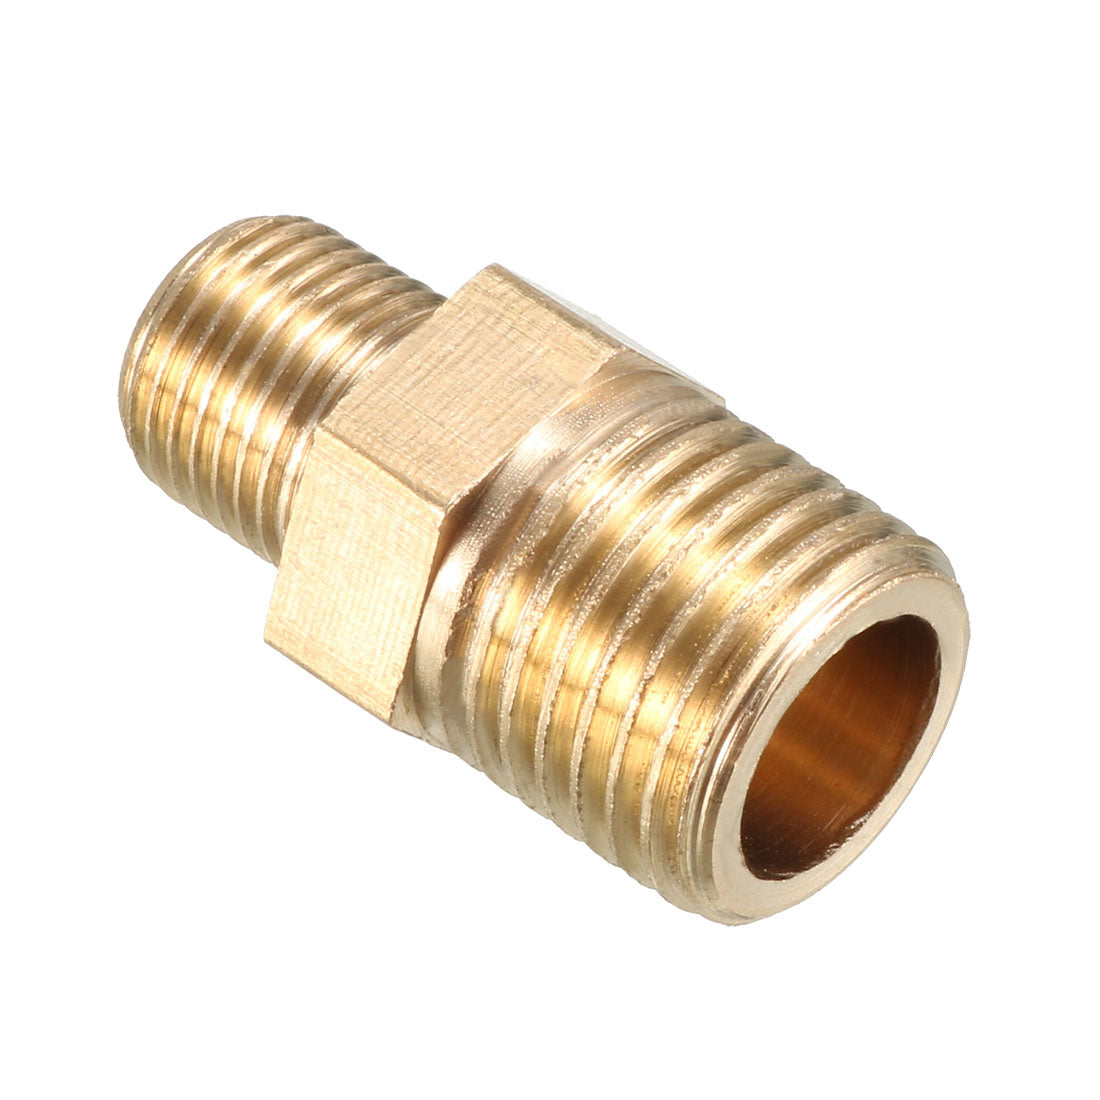 uxcell Uxcell Brass Pipe Fitting Reducing Hex Bushing 1/4 BSP Male x 1/8 BSP Male Adapter